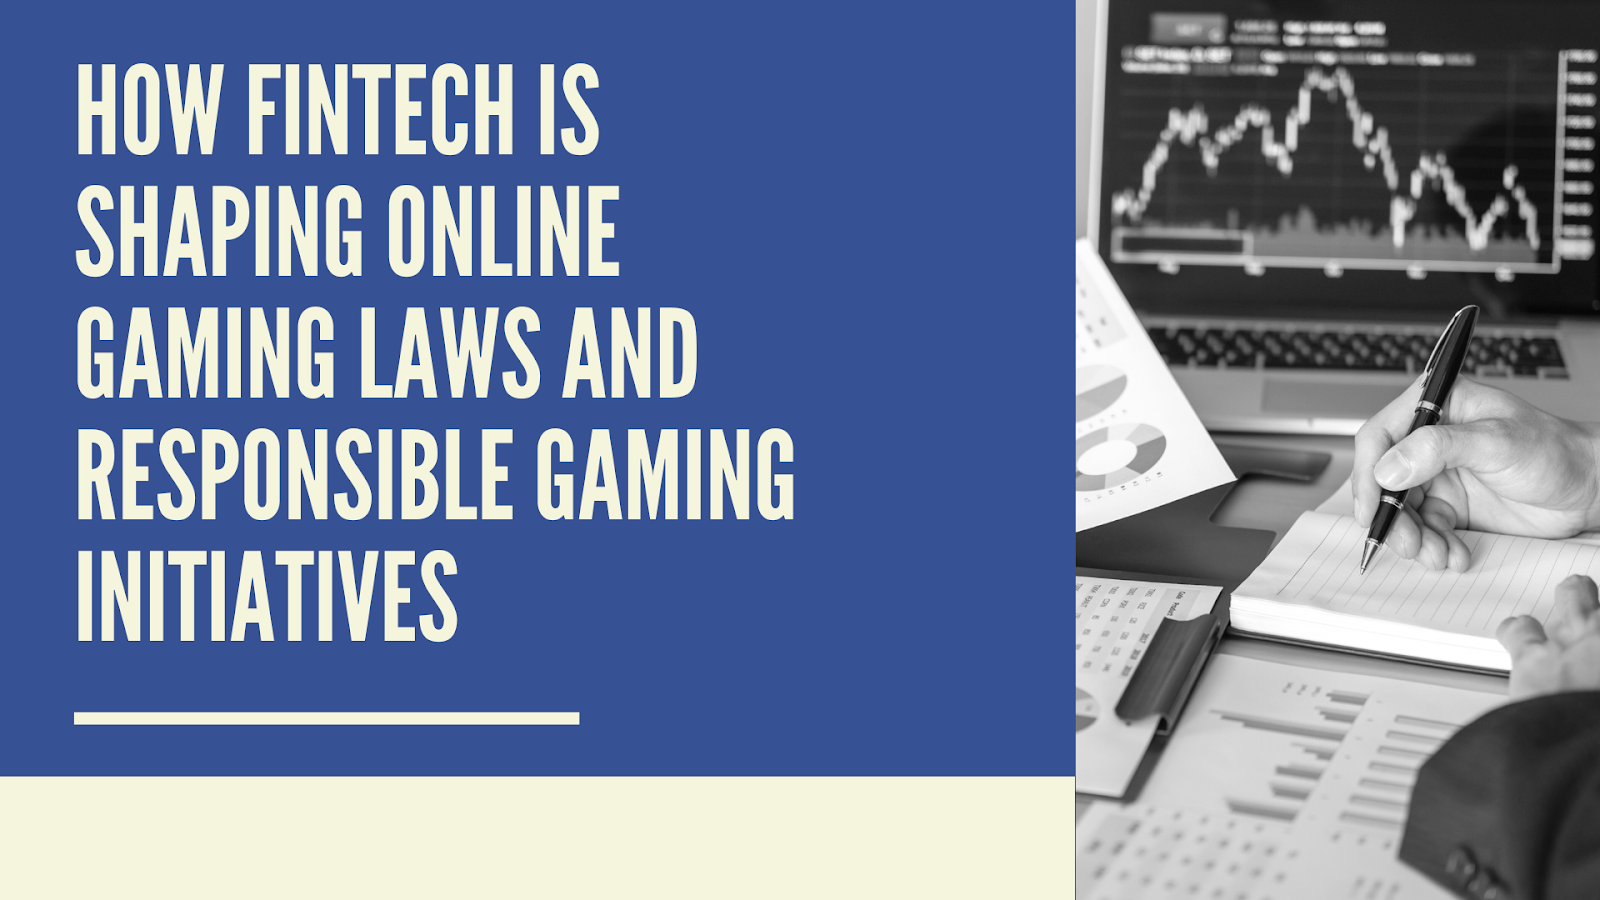 Fintech and Gaming, what to expect?